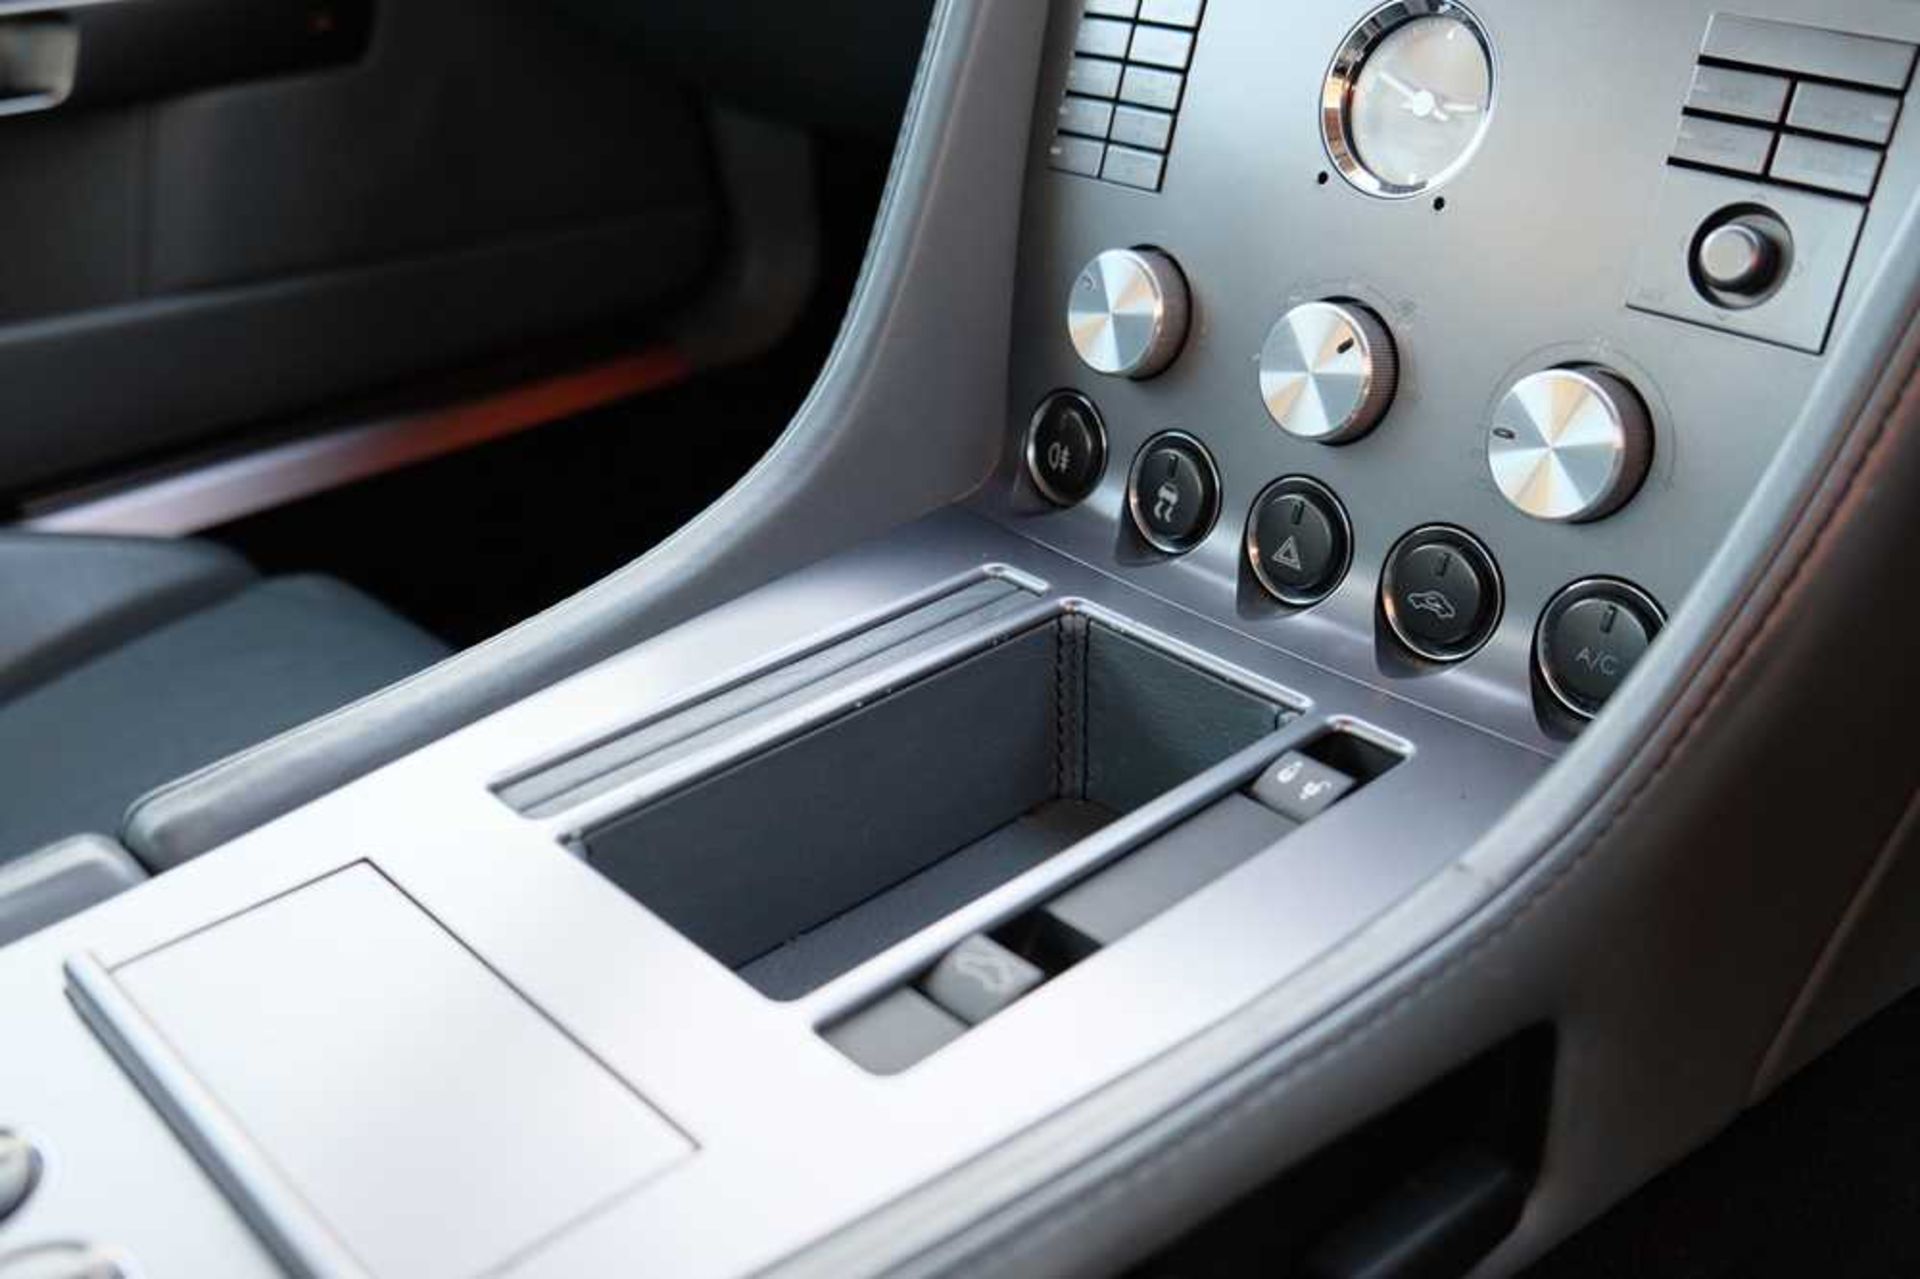 2005 Aston Martin DB9 c.25,000 from new and 4 former keepers - Image 37 of 59